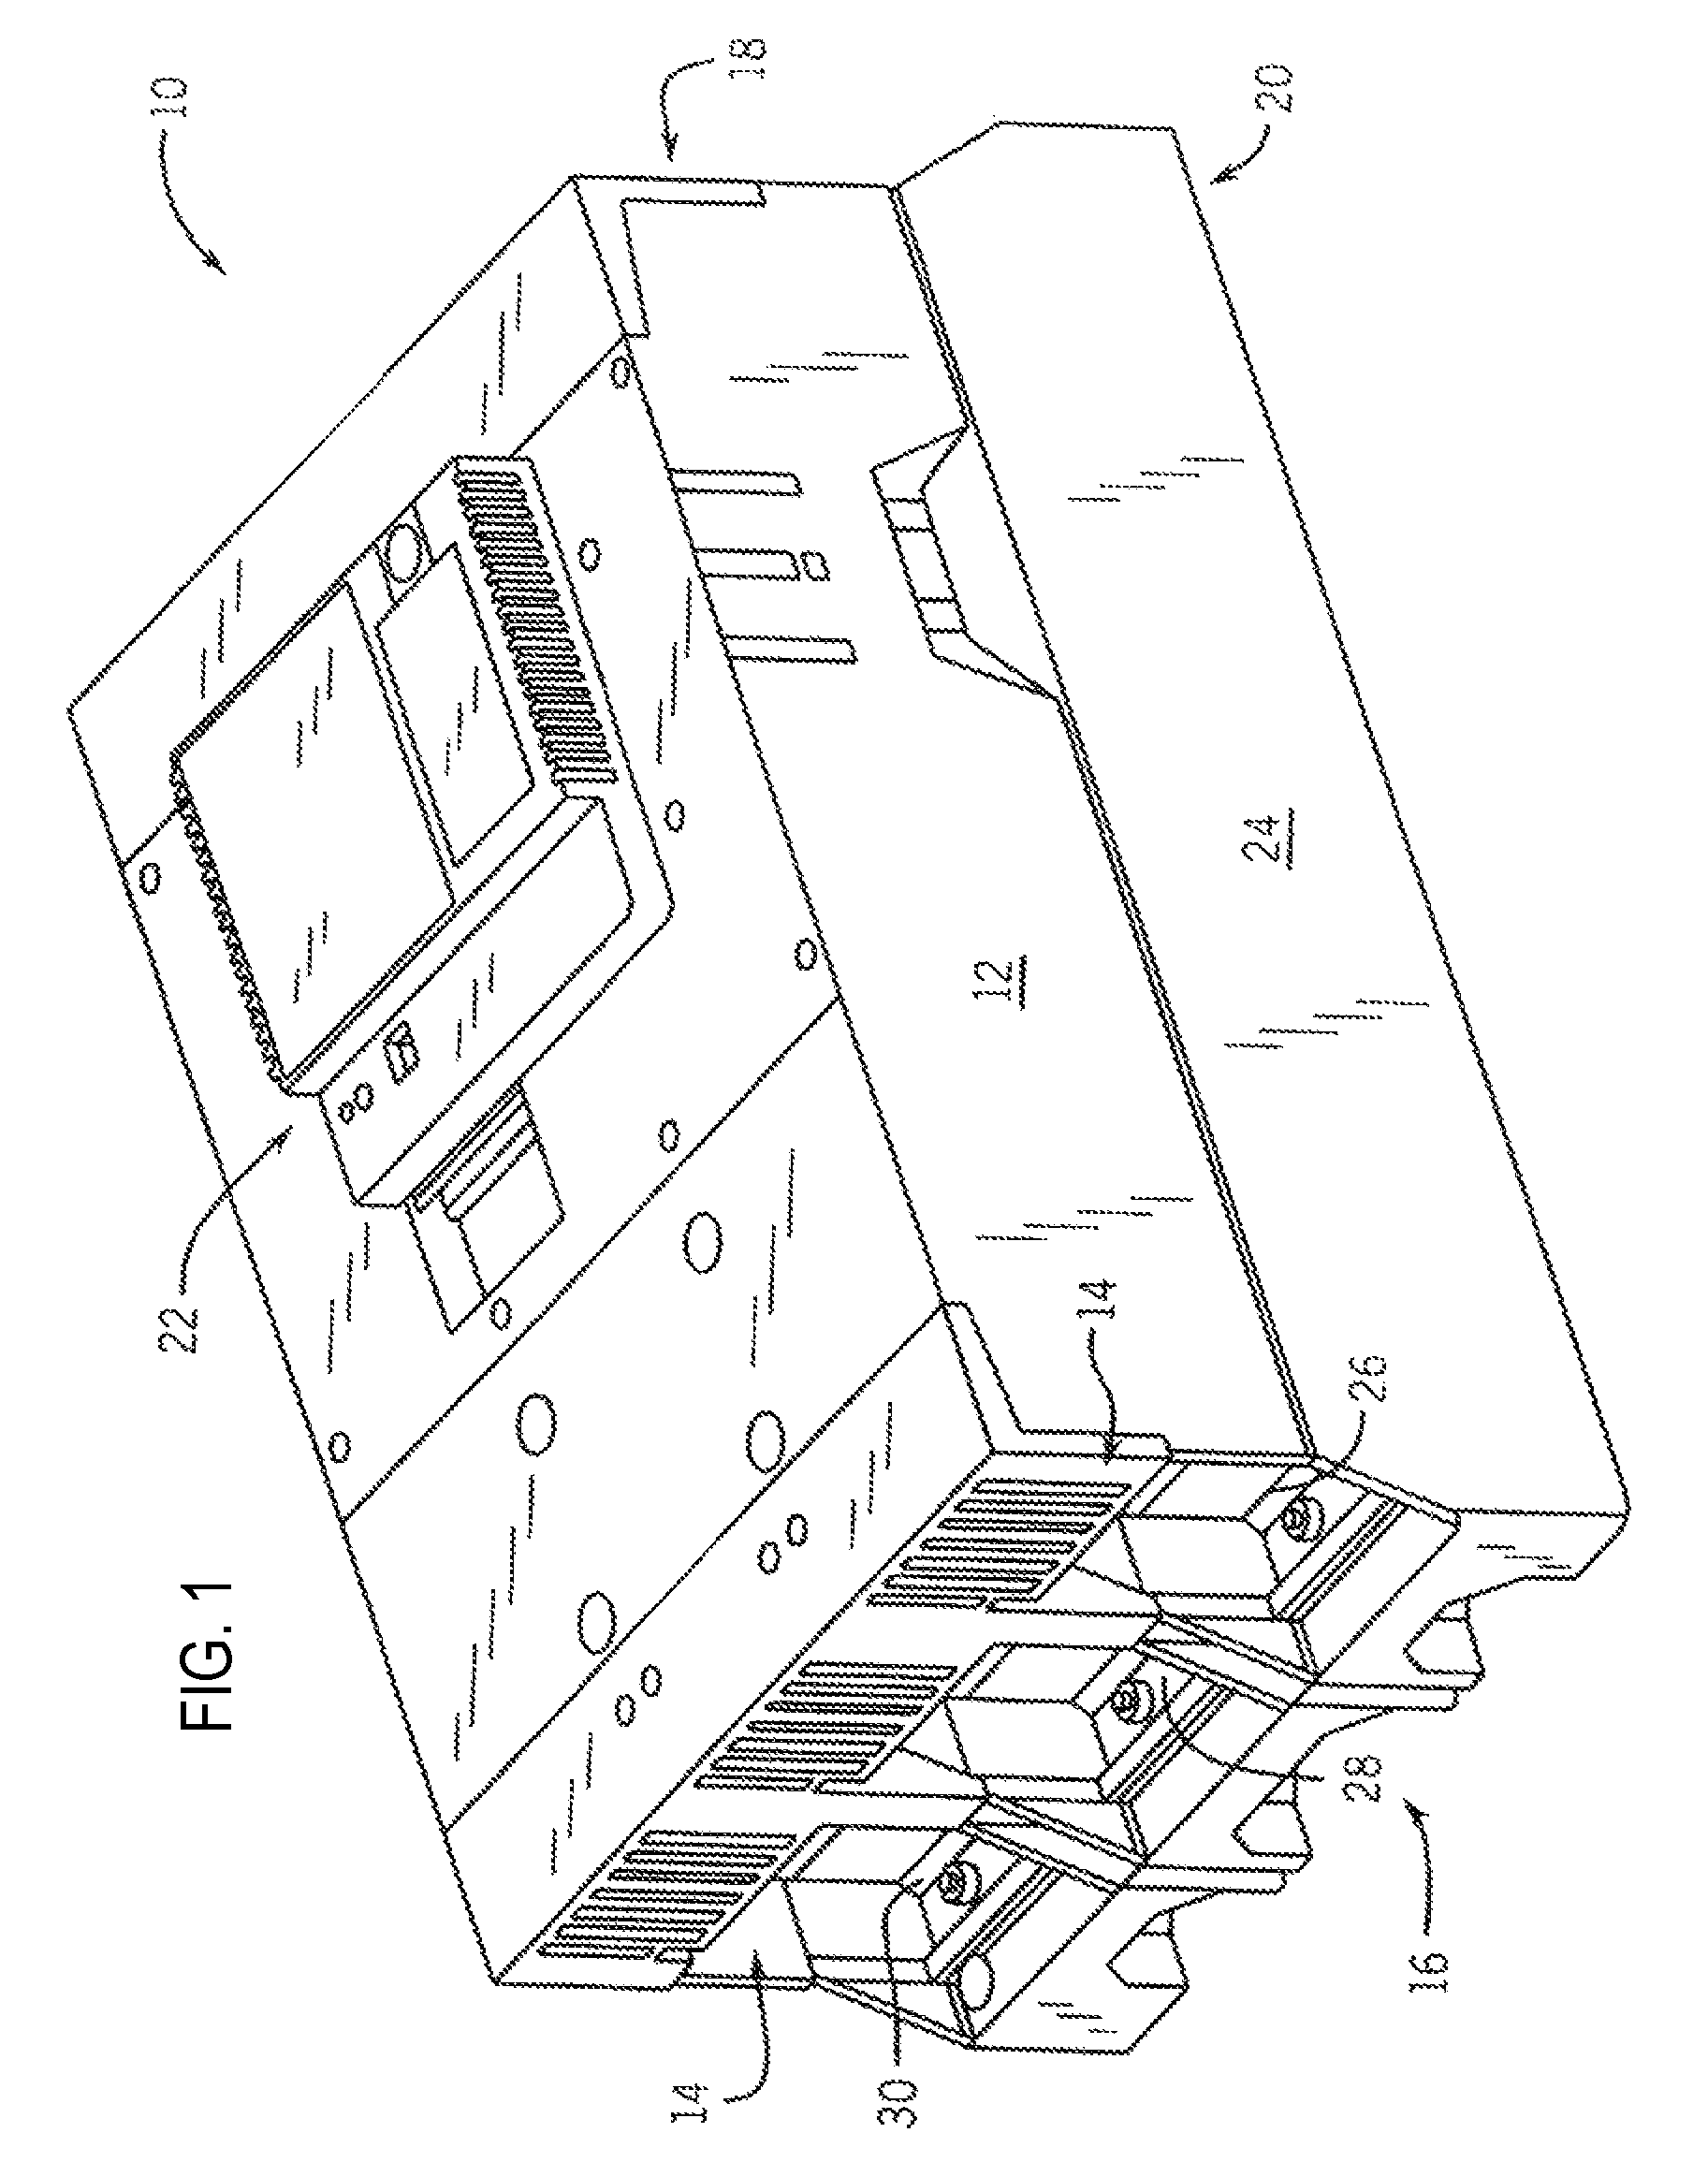 Soft starter system and method of operating same